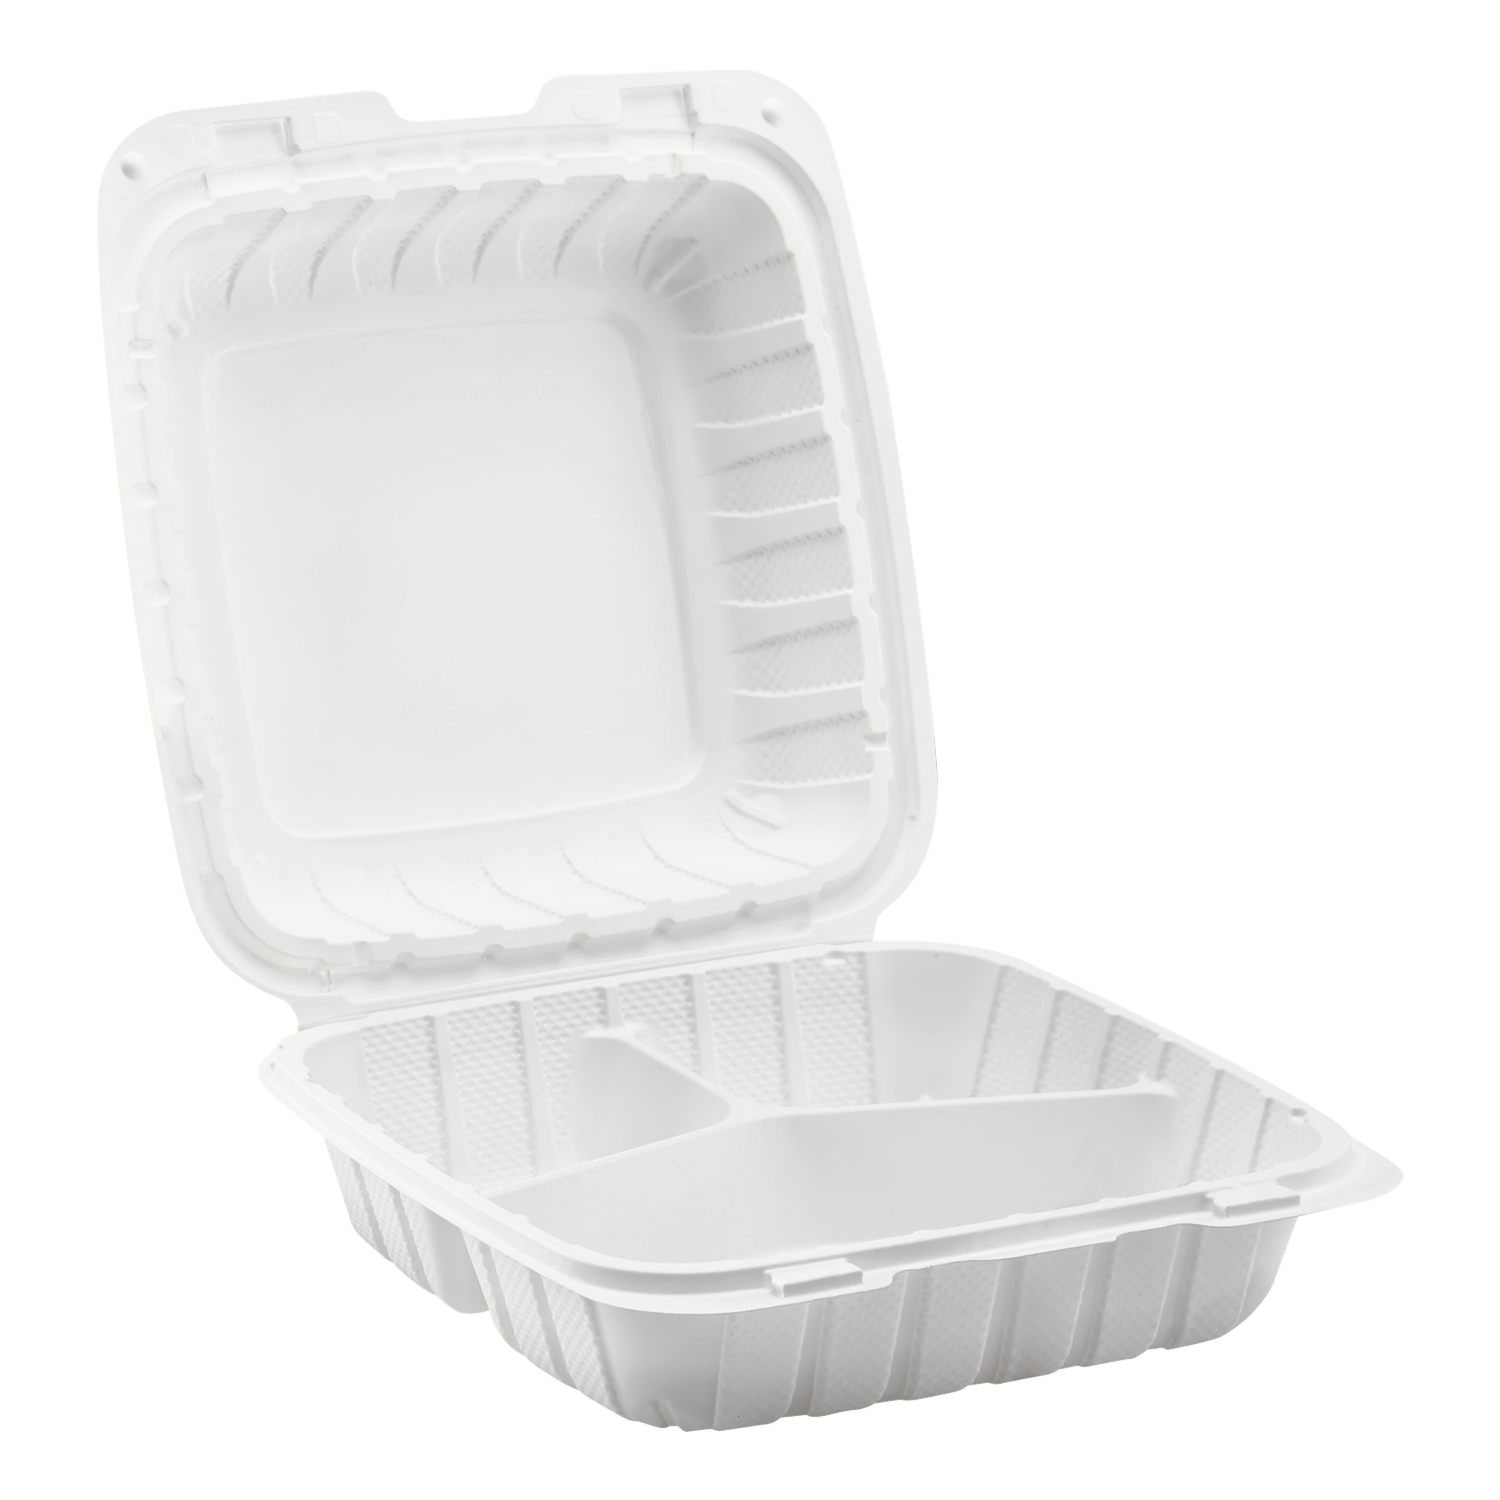 Three Plastic Food Containers For Take Away, Isolated On White Background  Stock Photo, Picture and Royalty Free Image. Image 83679659.